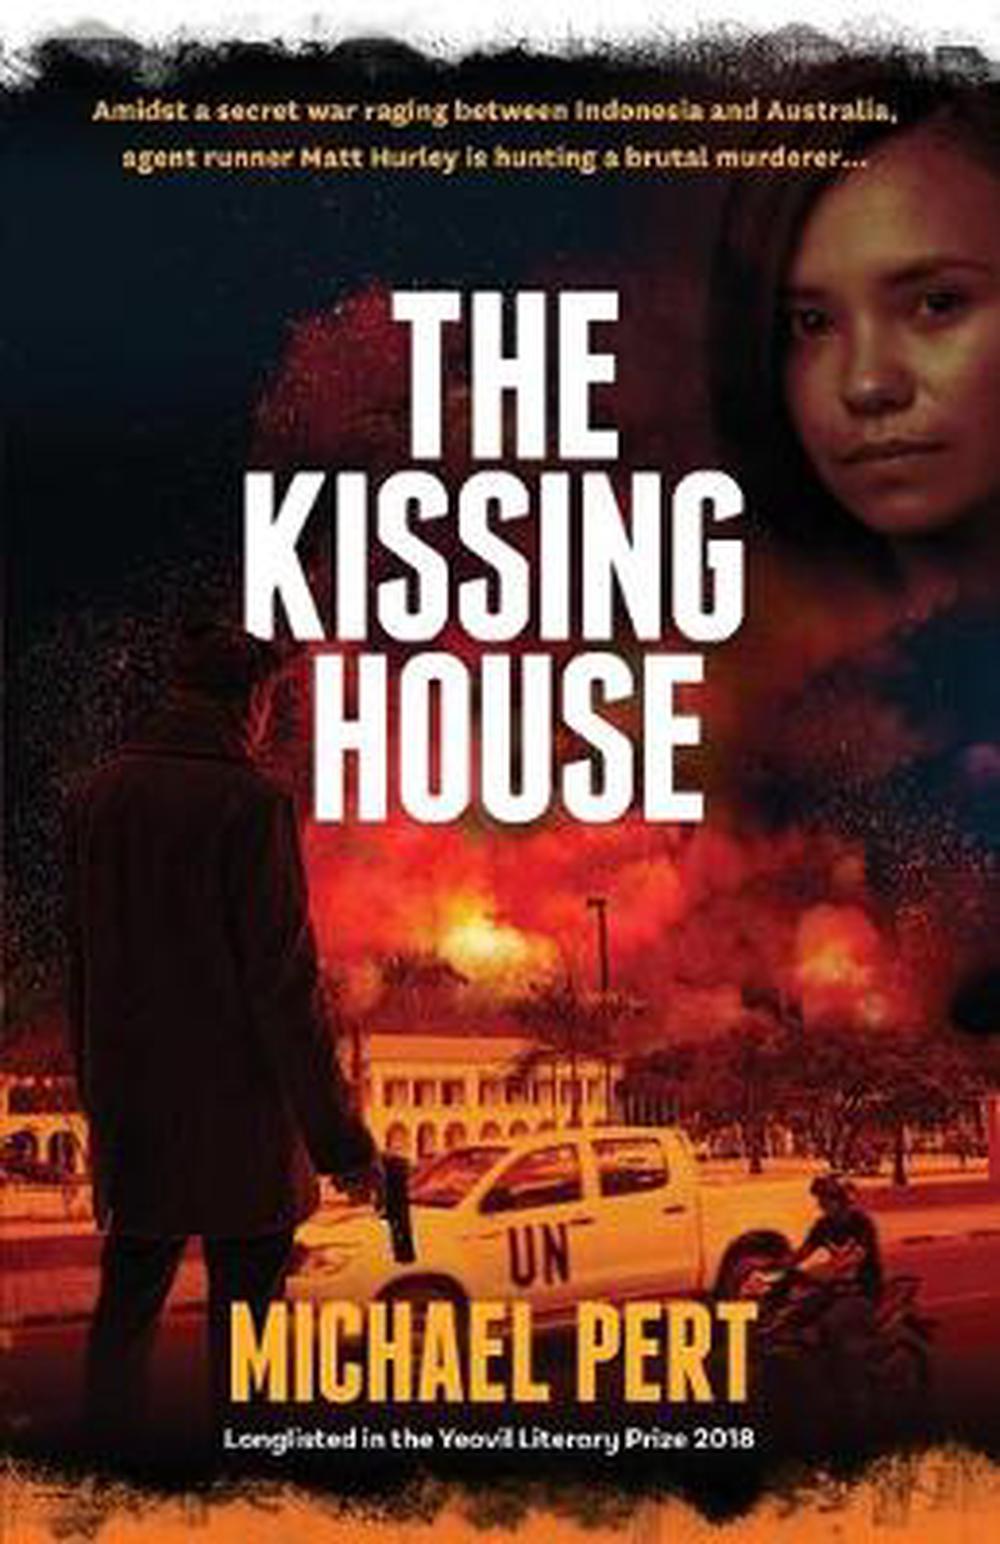 The kissing house